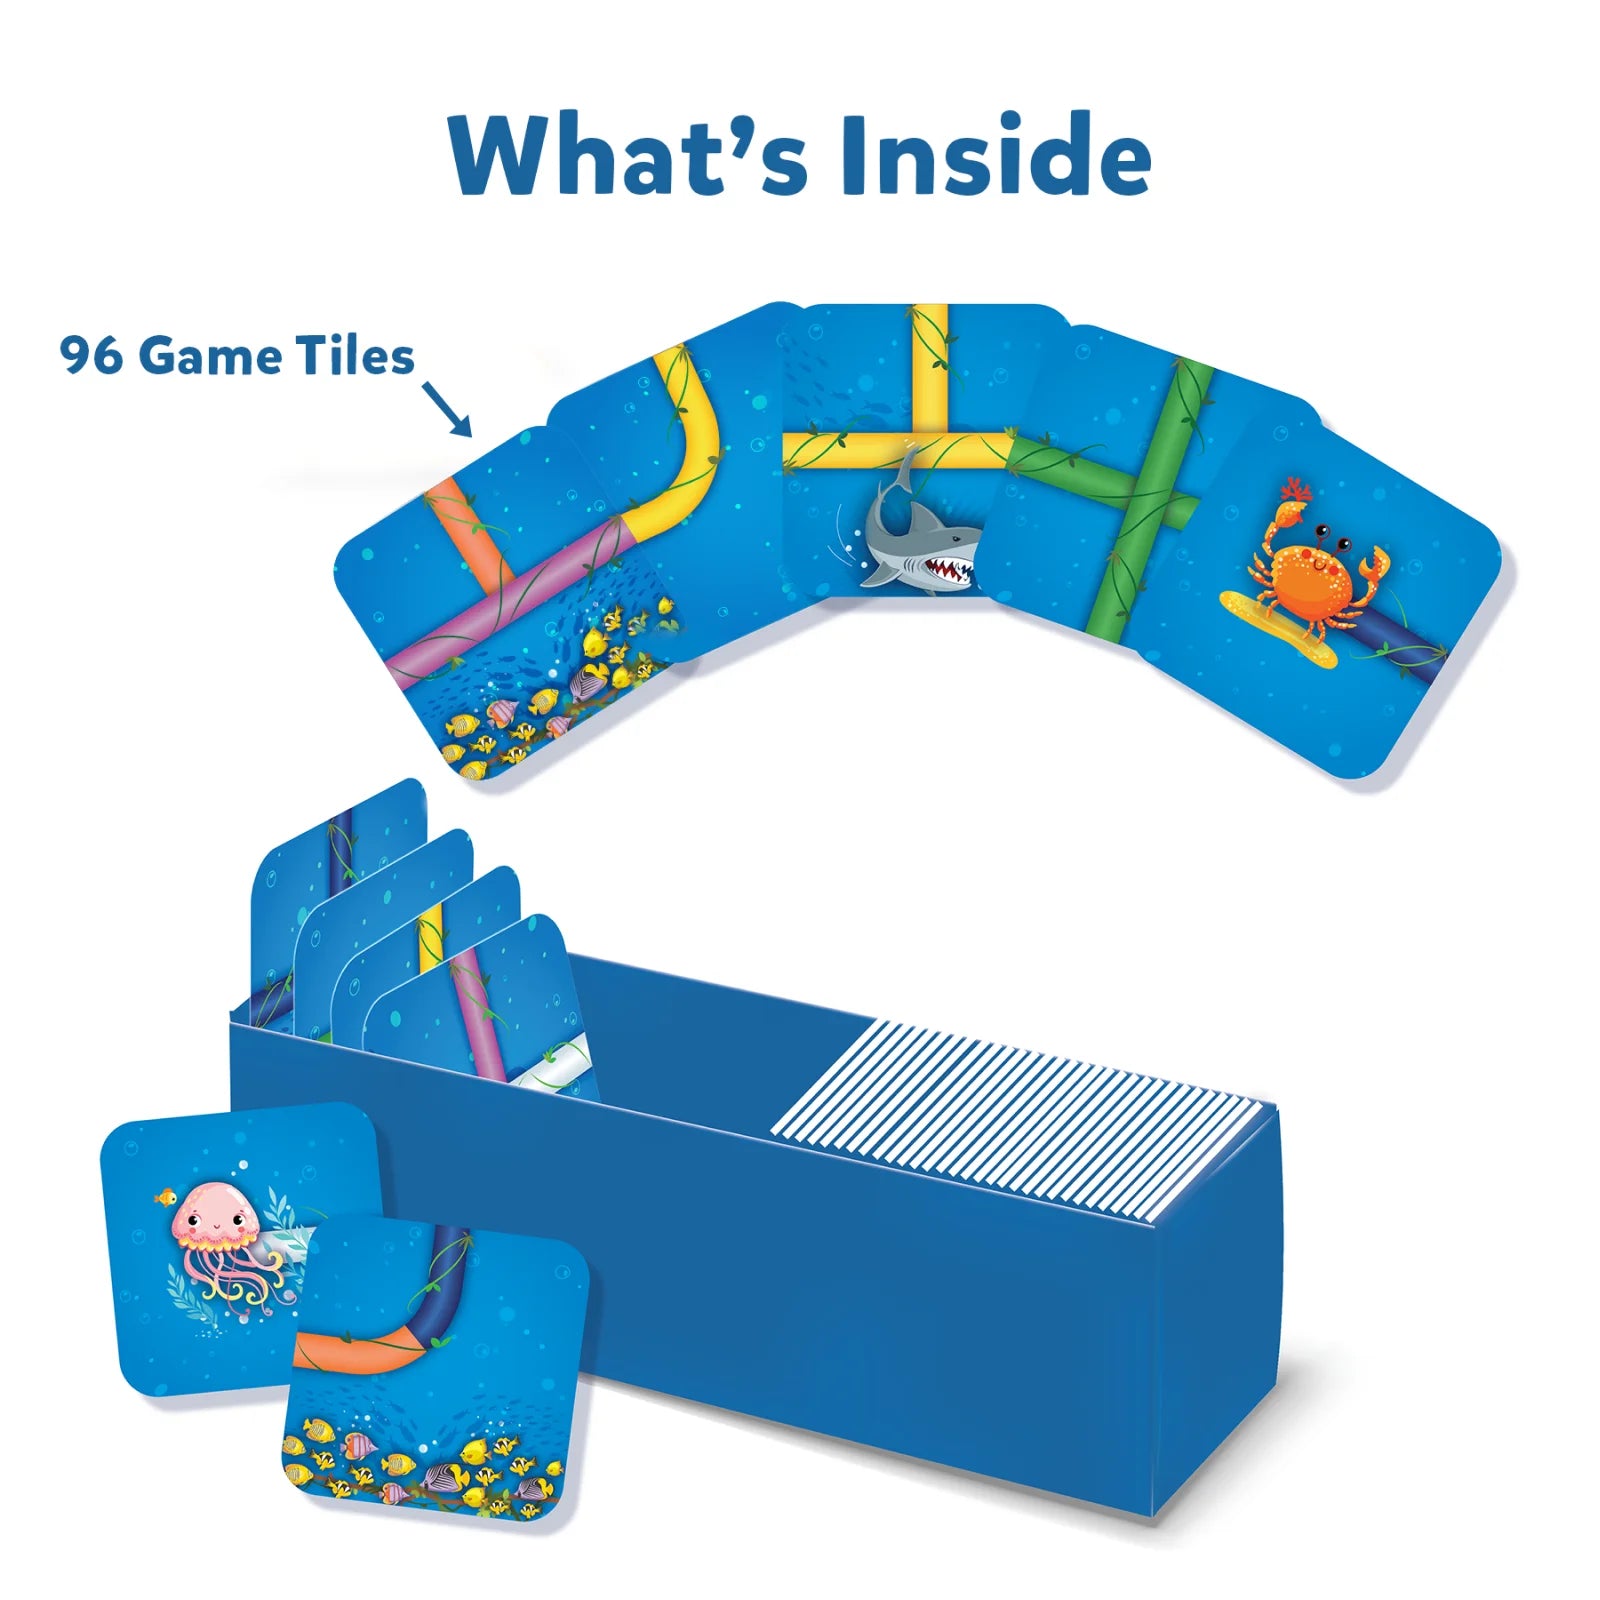 Connectors Shark Attack | Domino & Tile Game (ages 6+)